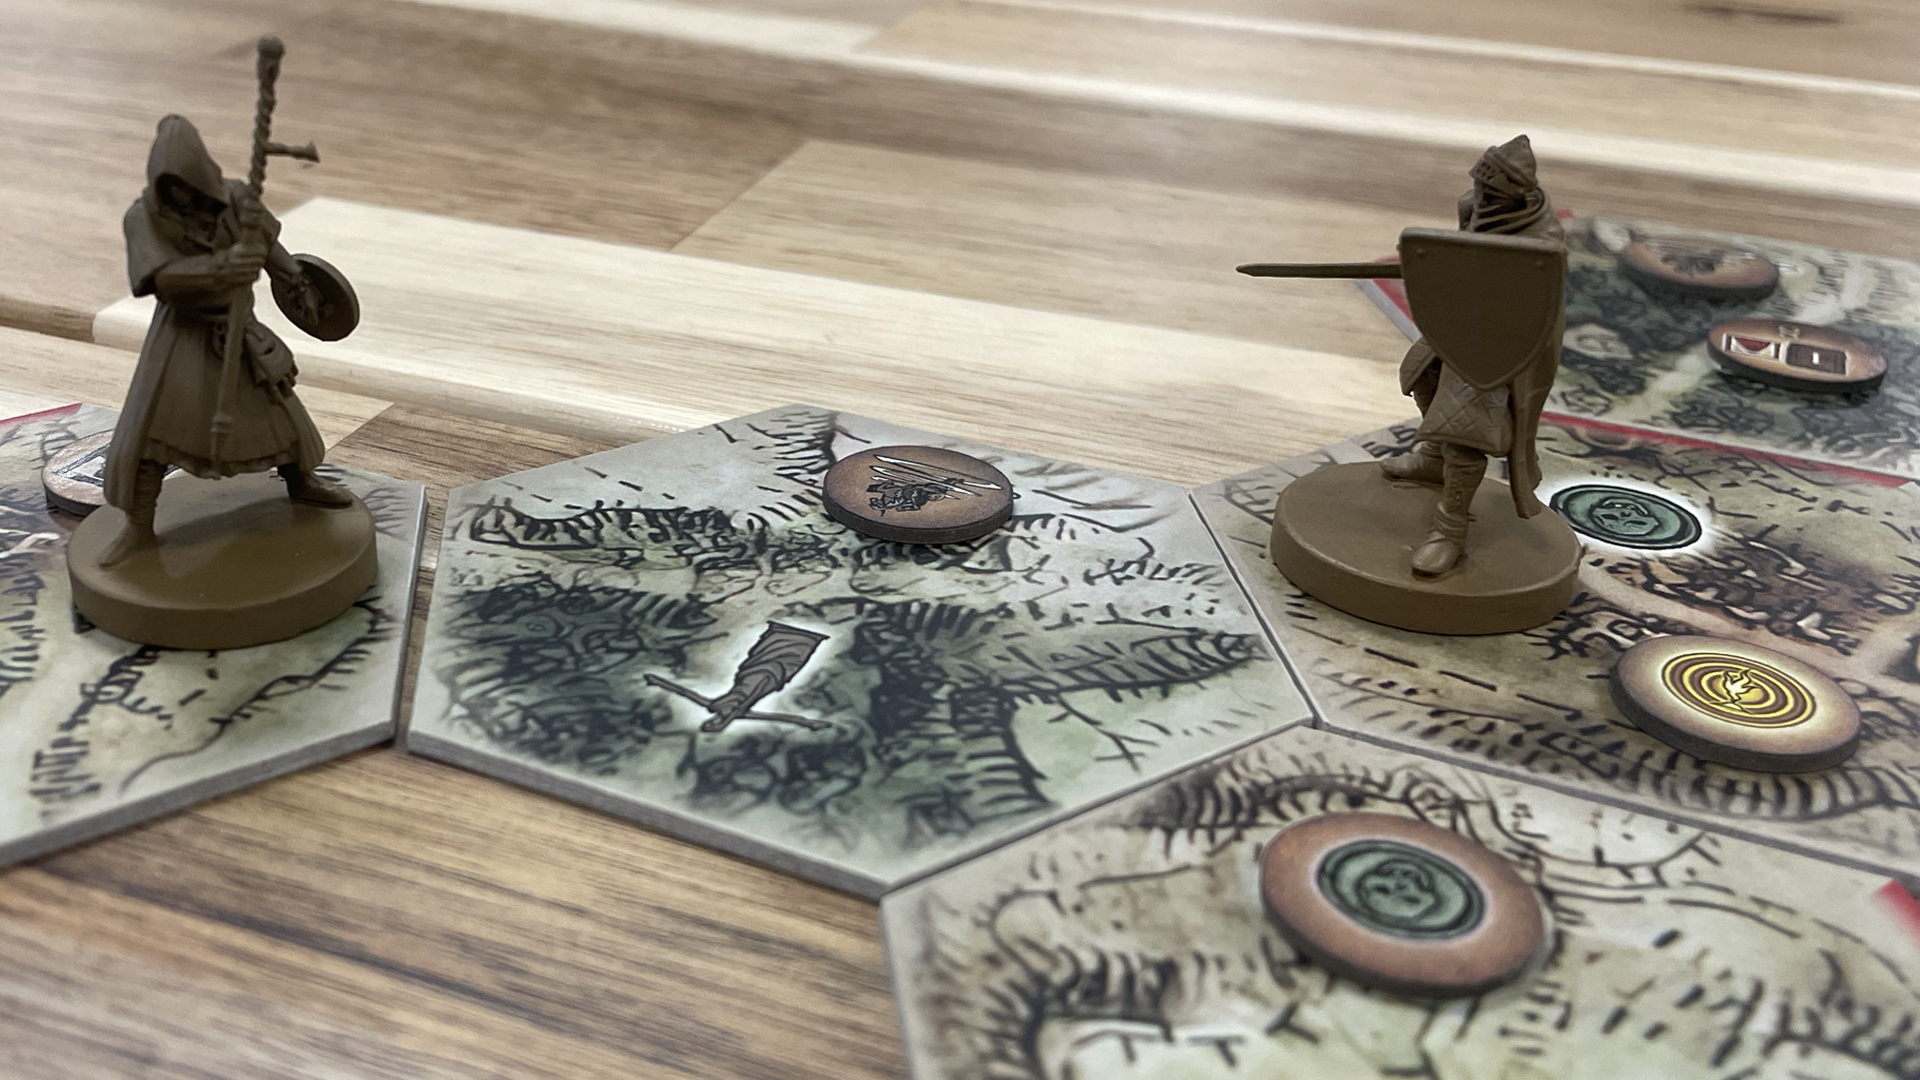 Image for The Elden Ring board game has already crowdfunded over £1.5 million on Kickstarter